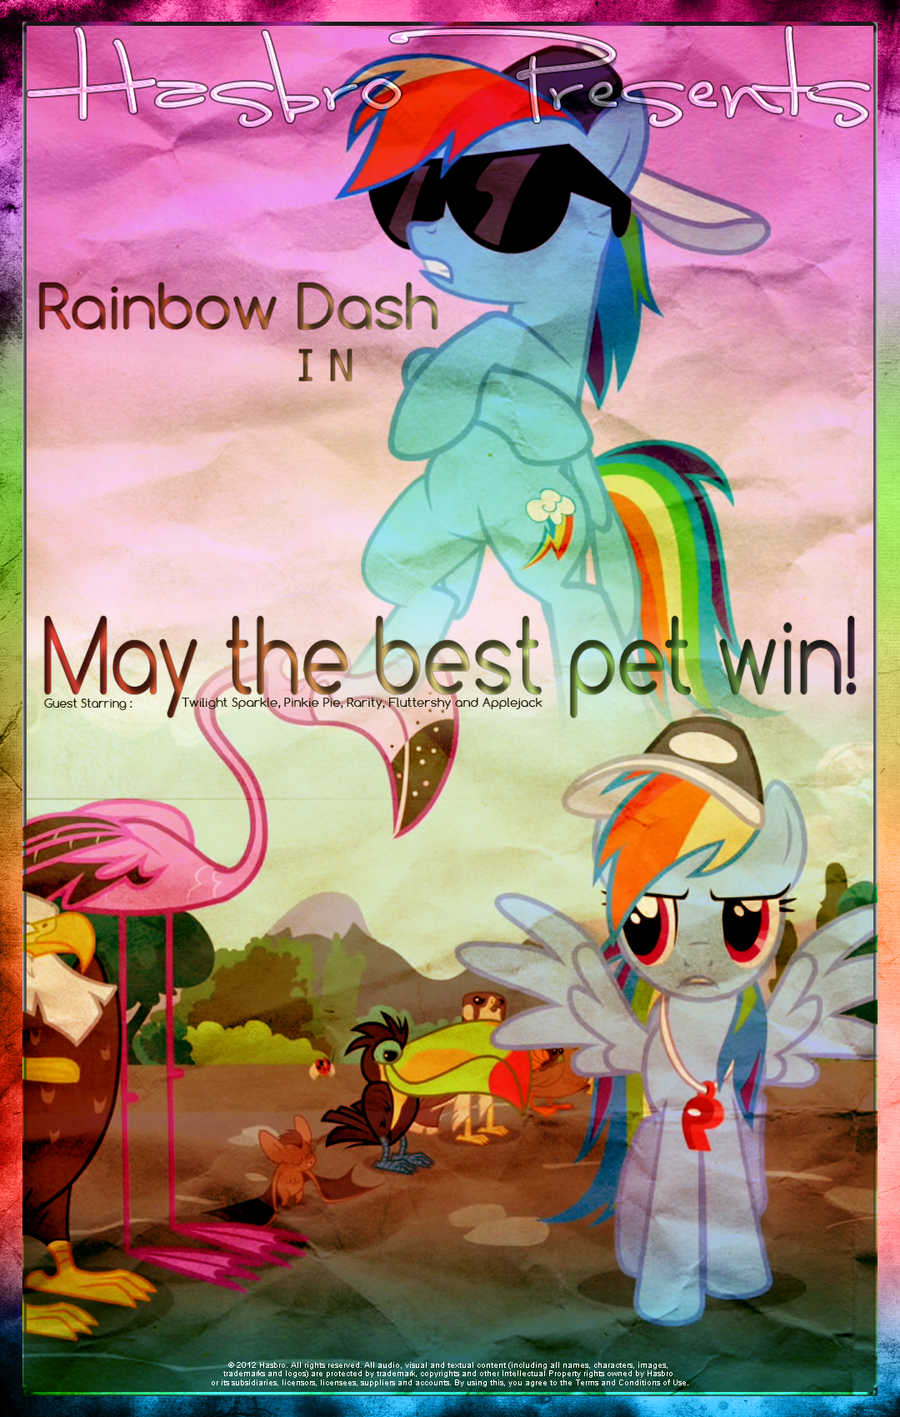 MLP : May the best pet win! - Movie Poster by pims1978 on 